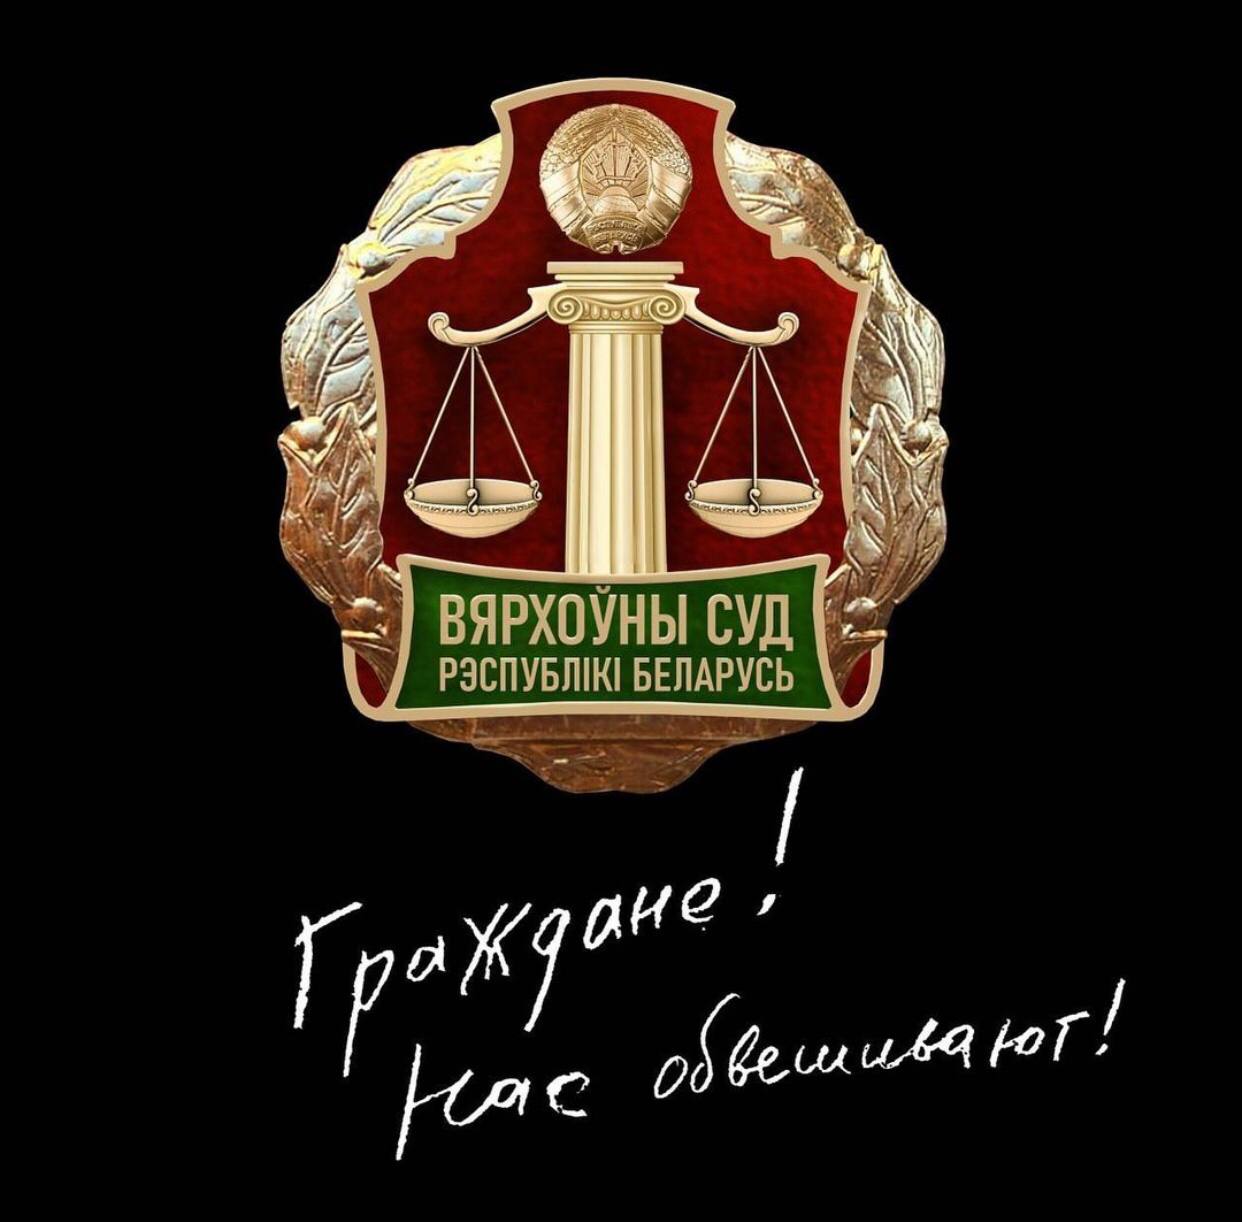 RALLIES AND MASS EVENTS. LEGISLATION OF THE REPUBLIC OF BELARUS